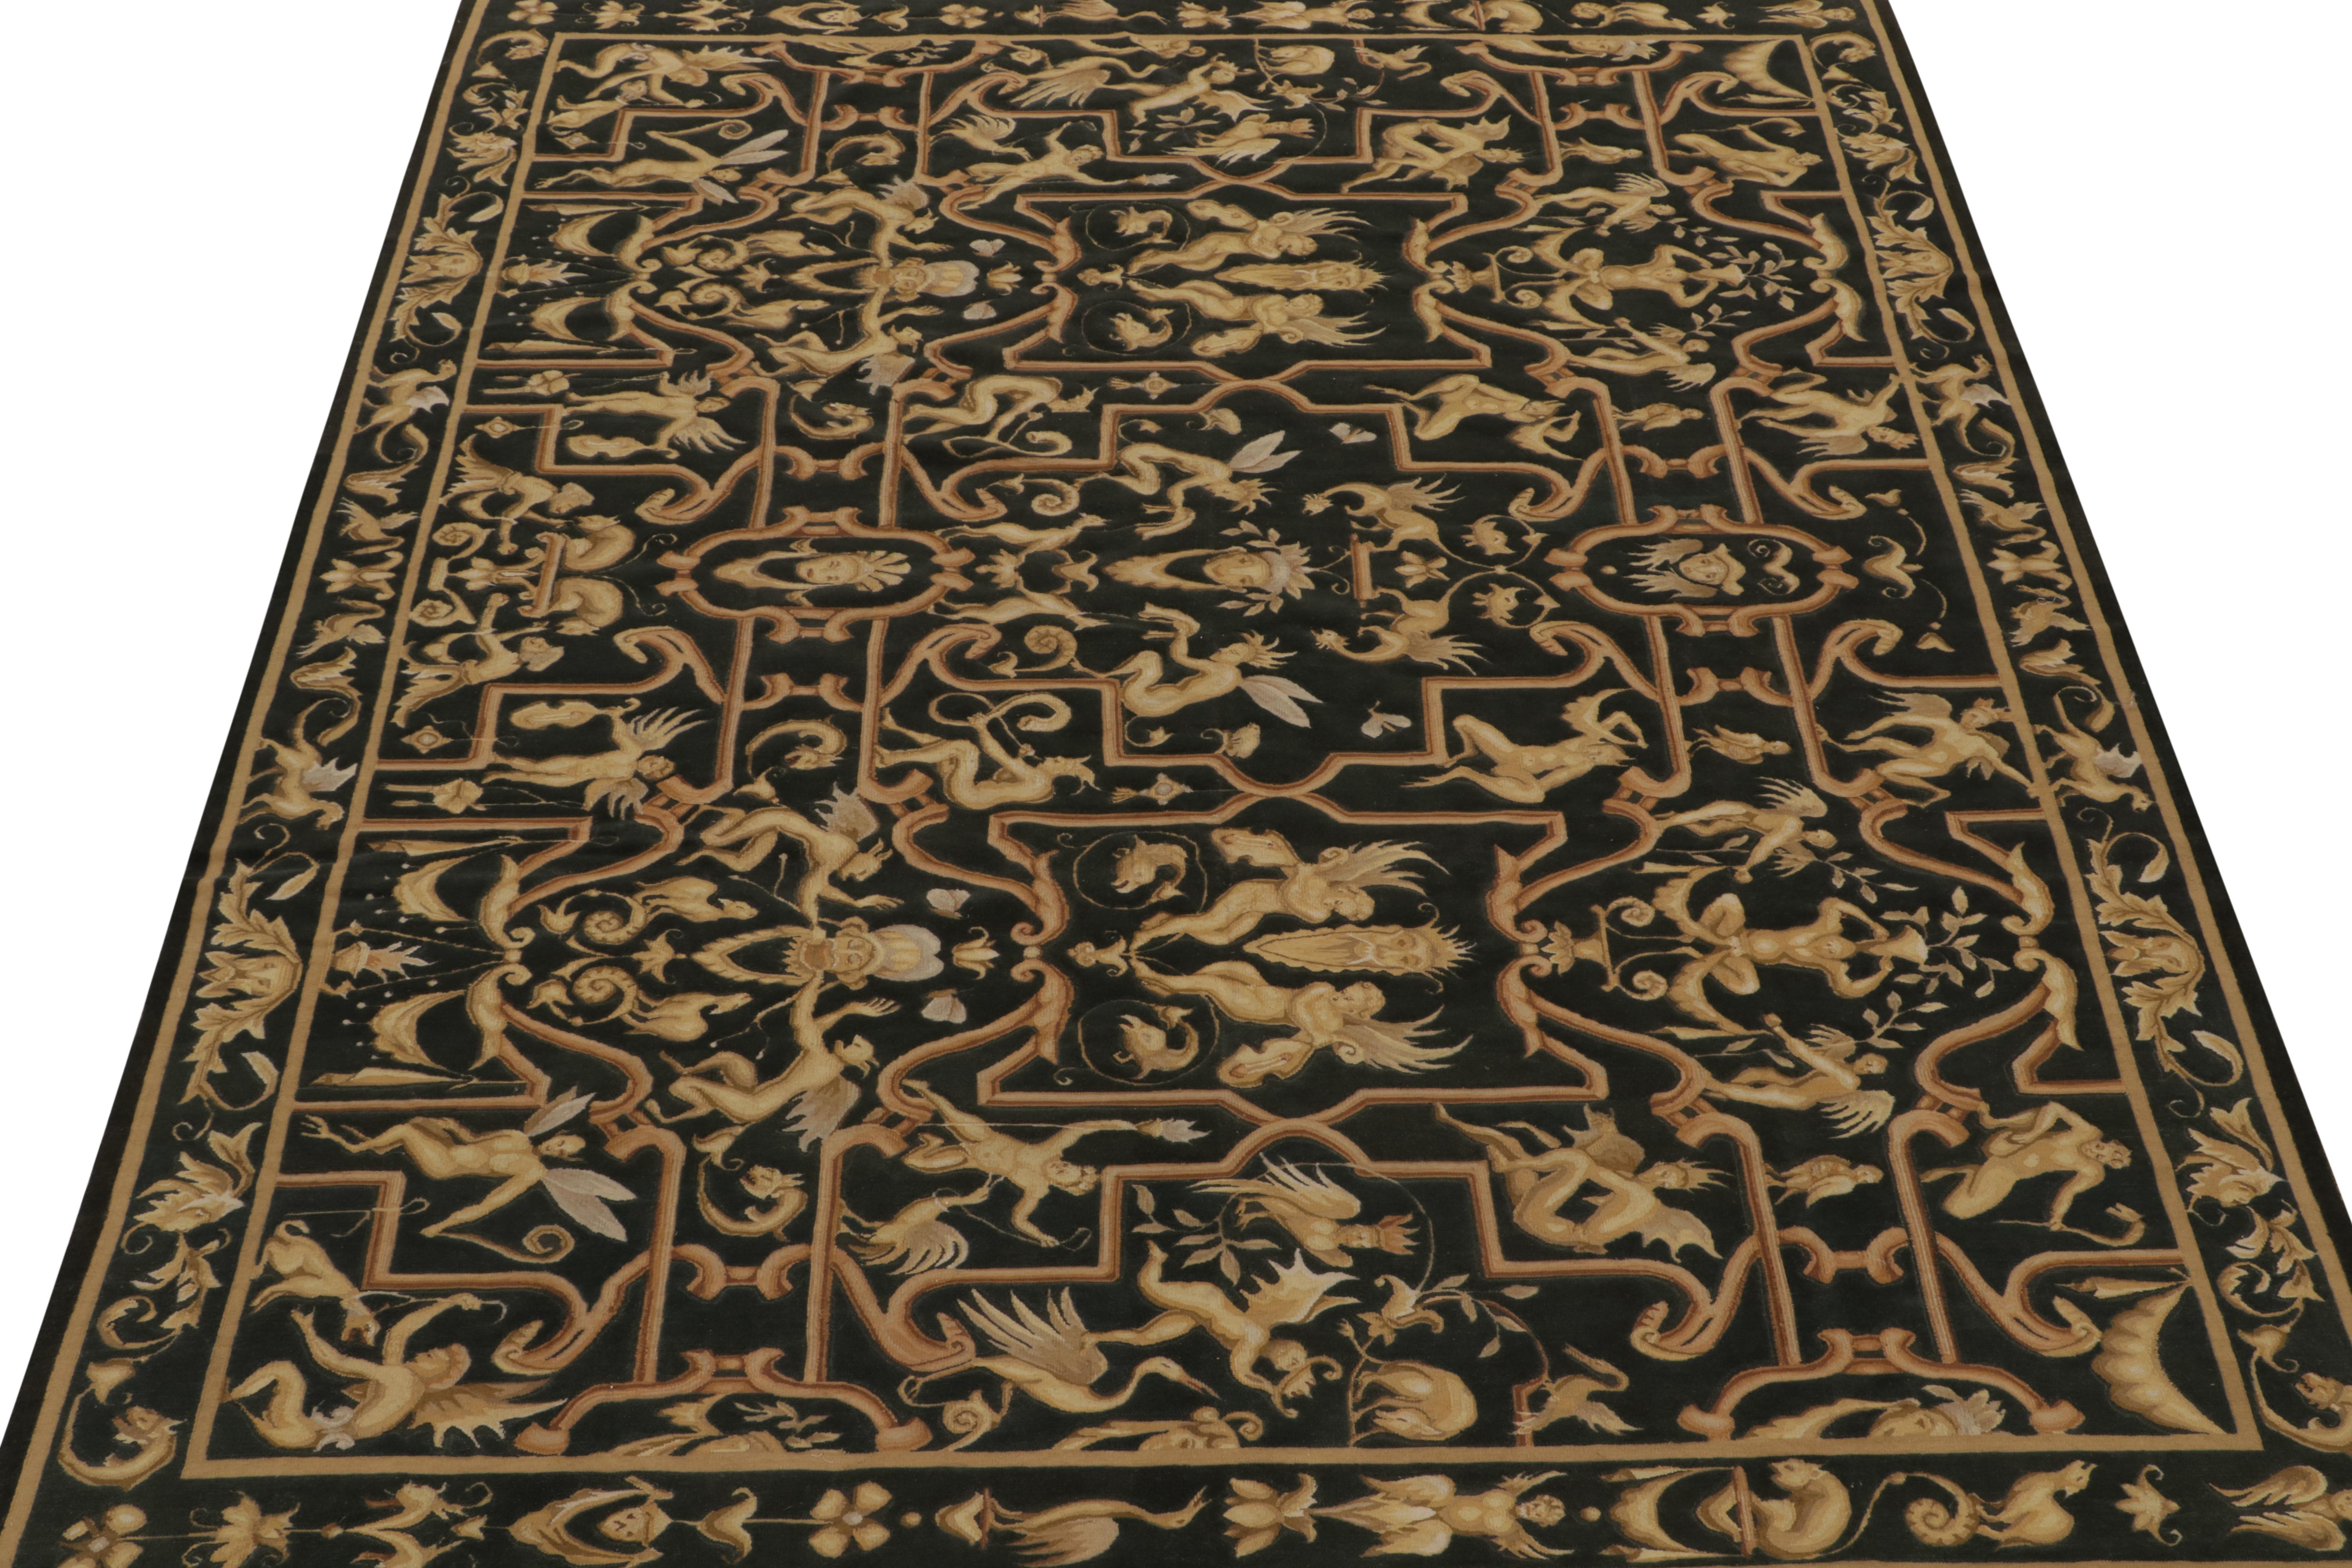 Chinese Rug & Kilim’s European Tudor style Flat Weave in Black with Gold Pictorial For Sale